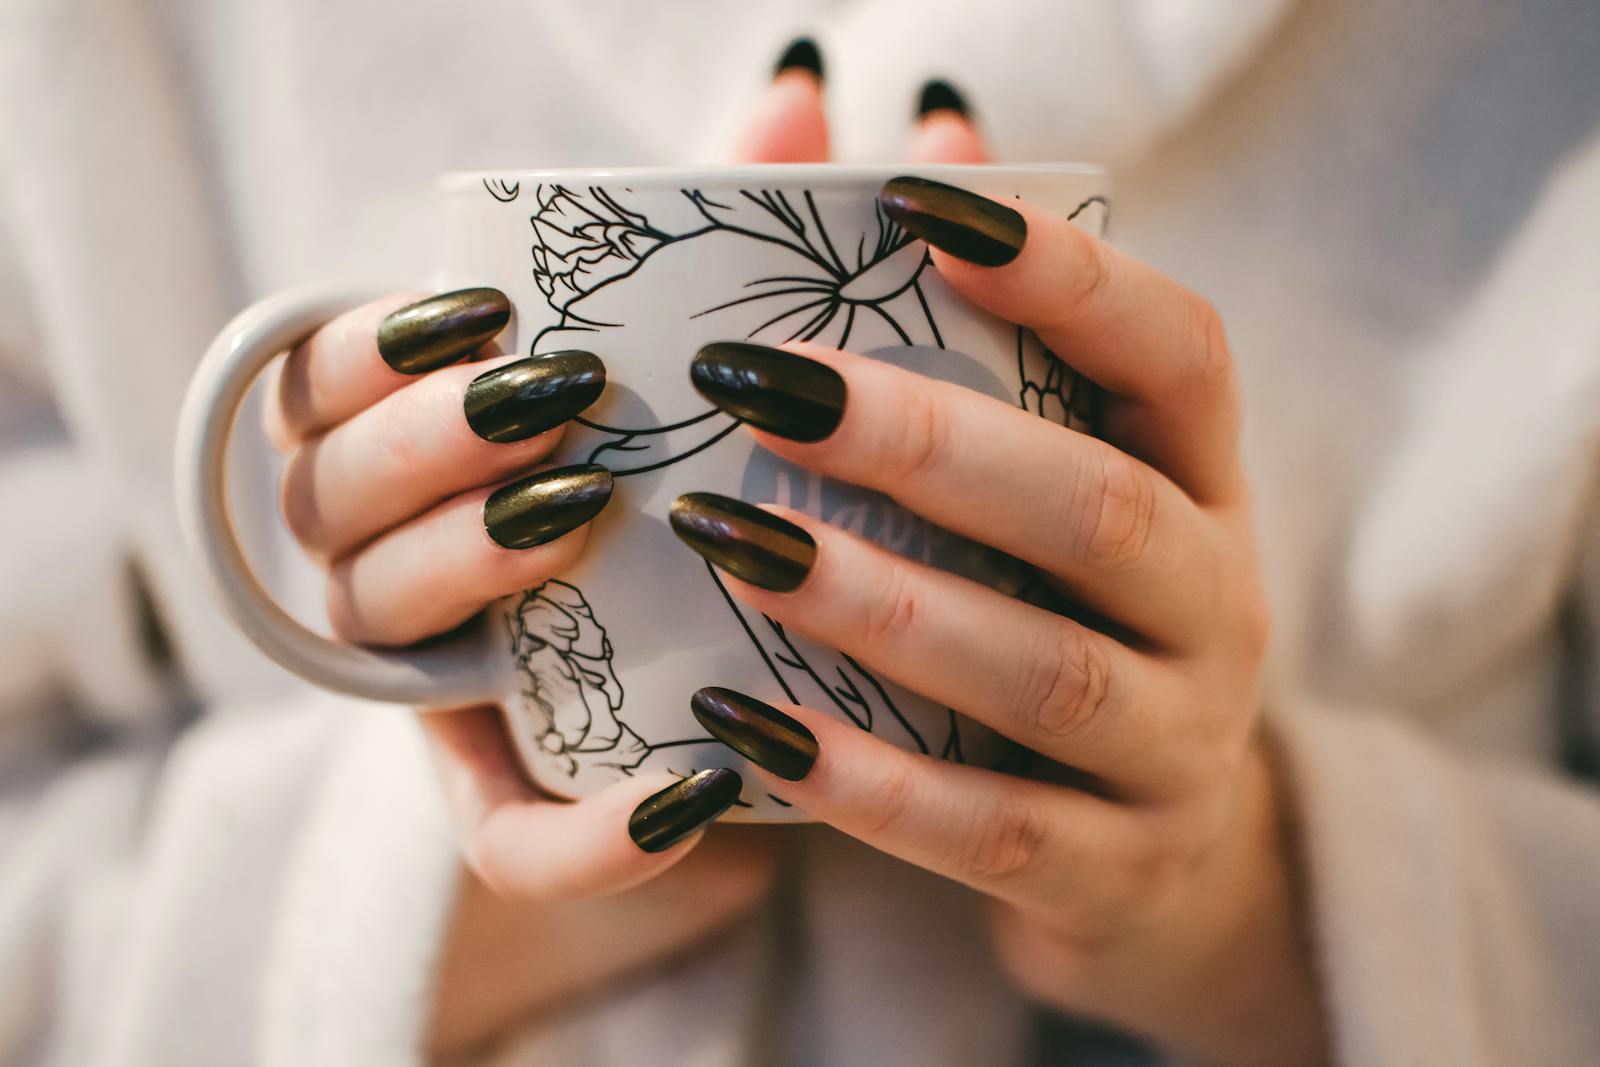 How often do you get a new manicure?